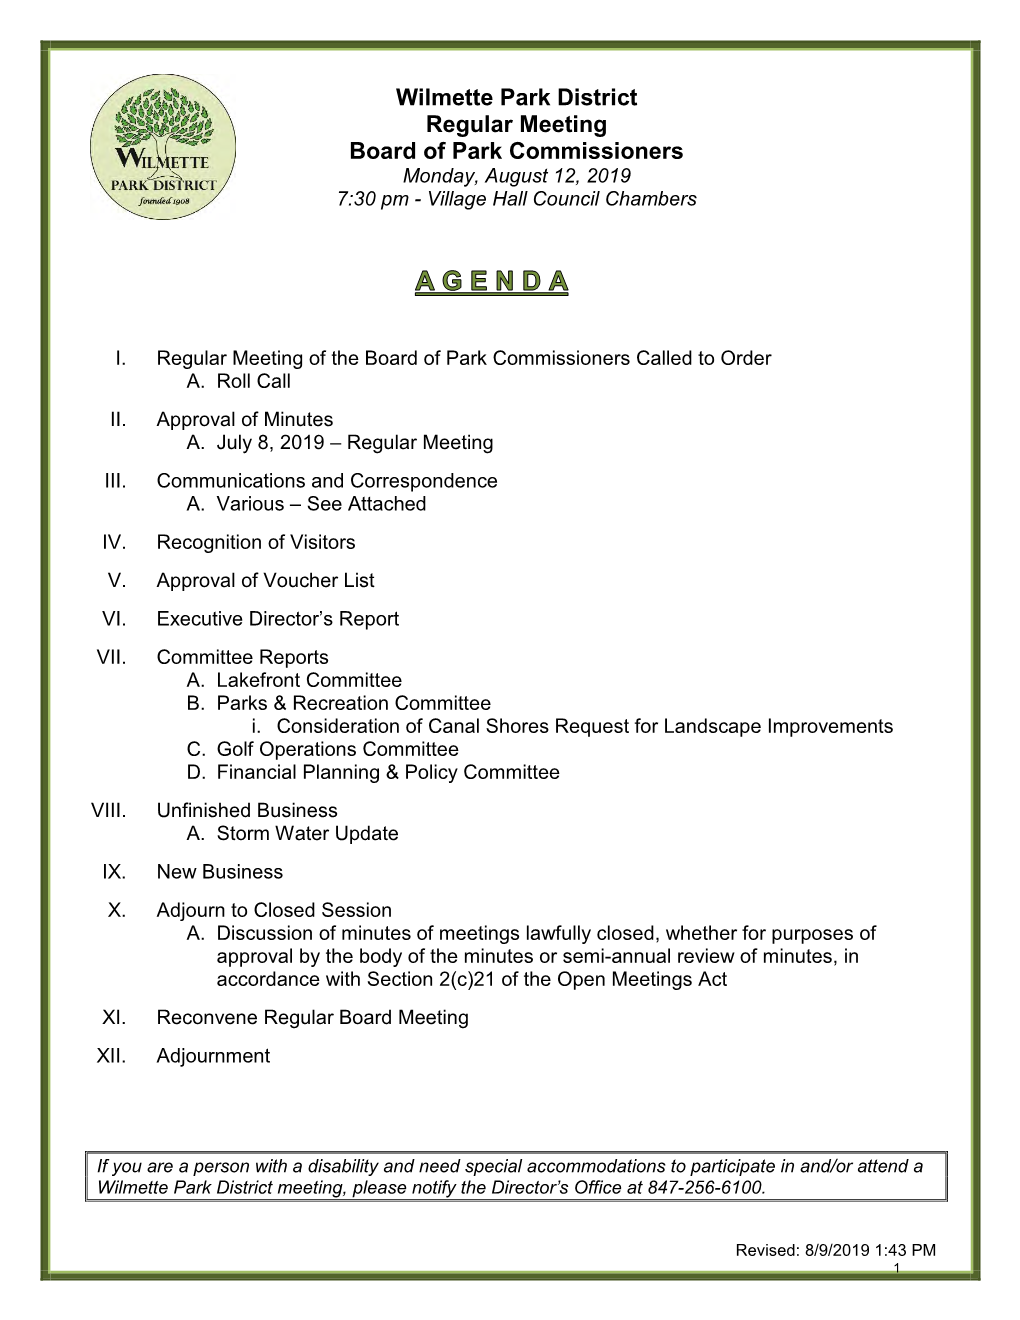 Wilmette Park District Regular Meeting Board of Park Commissioners Monday, August 12, 2019 7:30 Pm - Village Hall Council Chambers